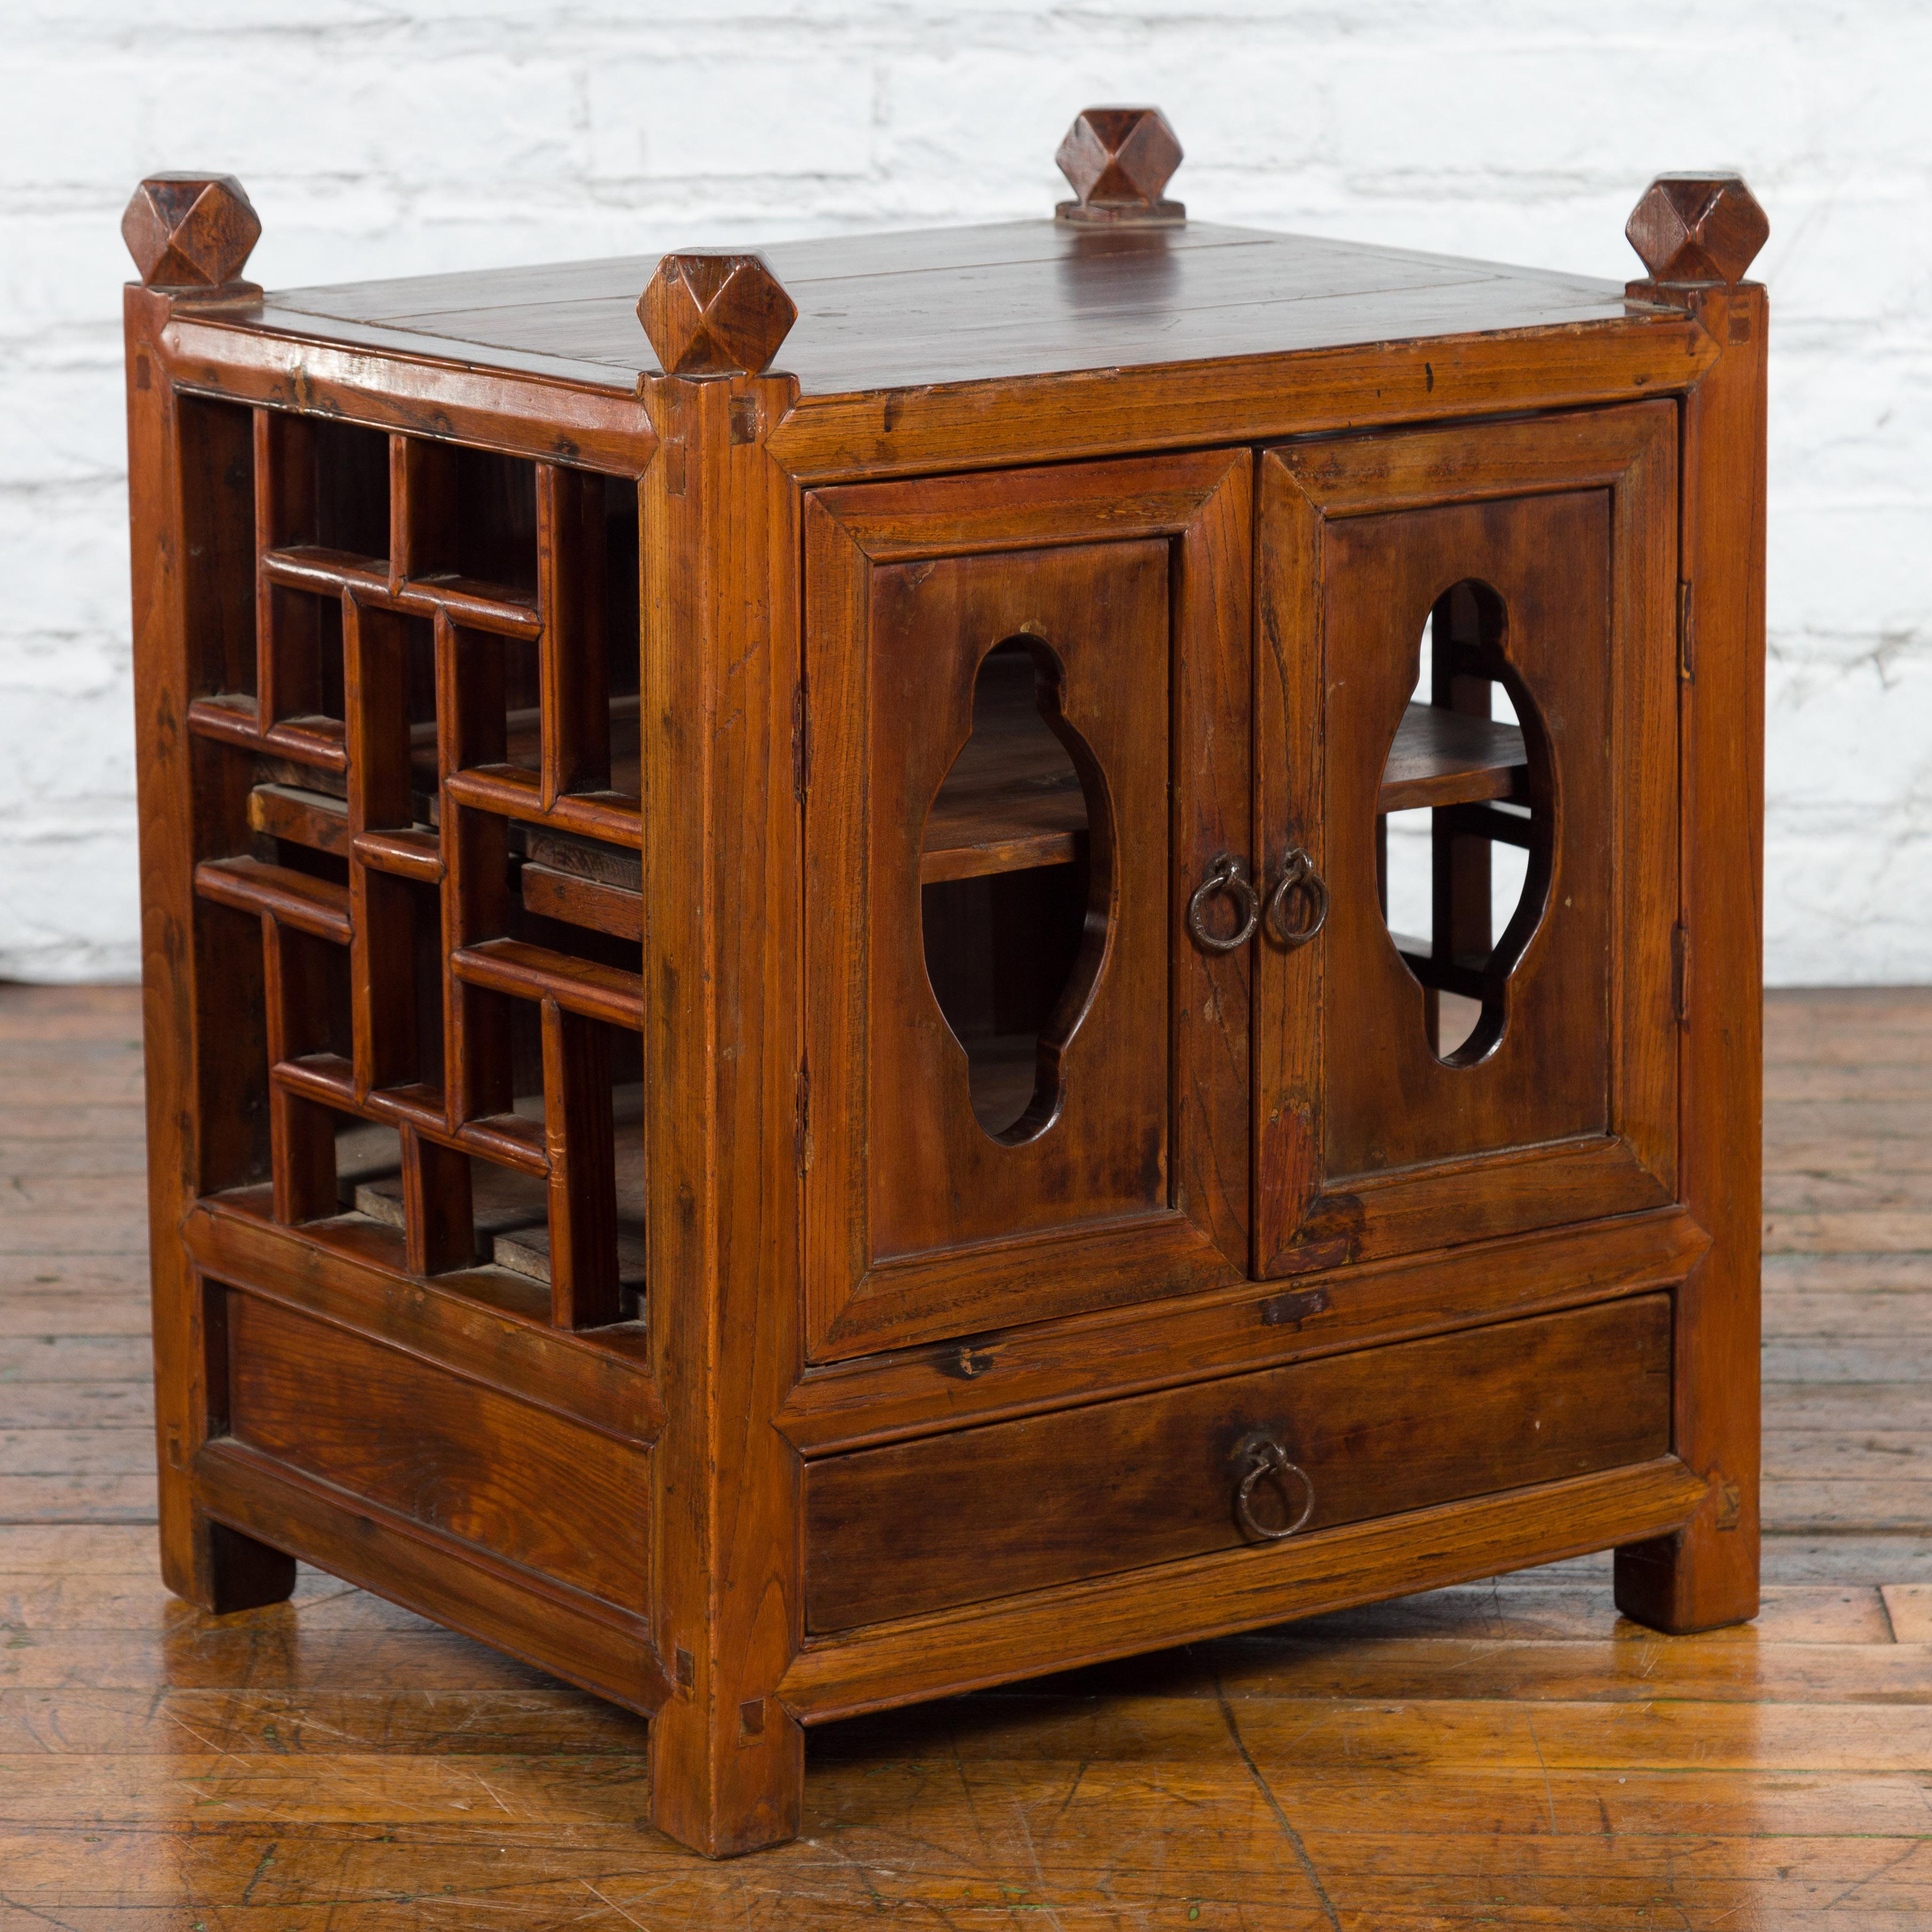 19th Century Qing Dynasty Chinese Brown Lacquered Bedside Cabinet with Fretwork Motifs